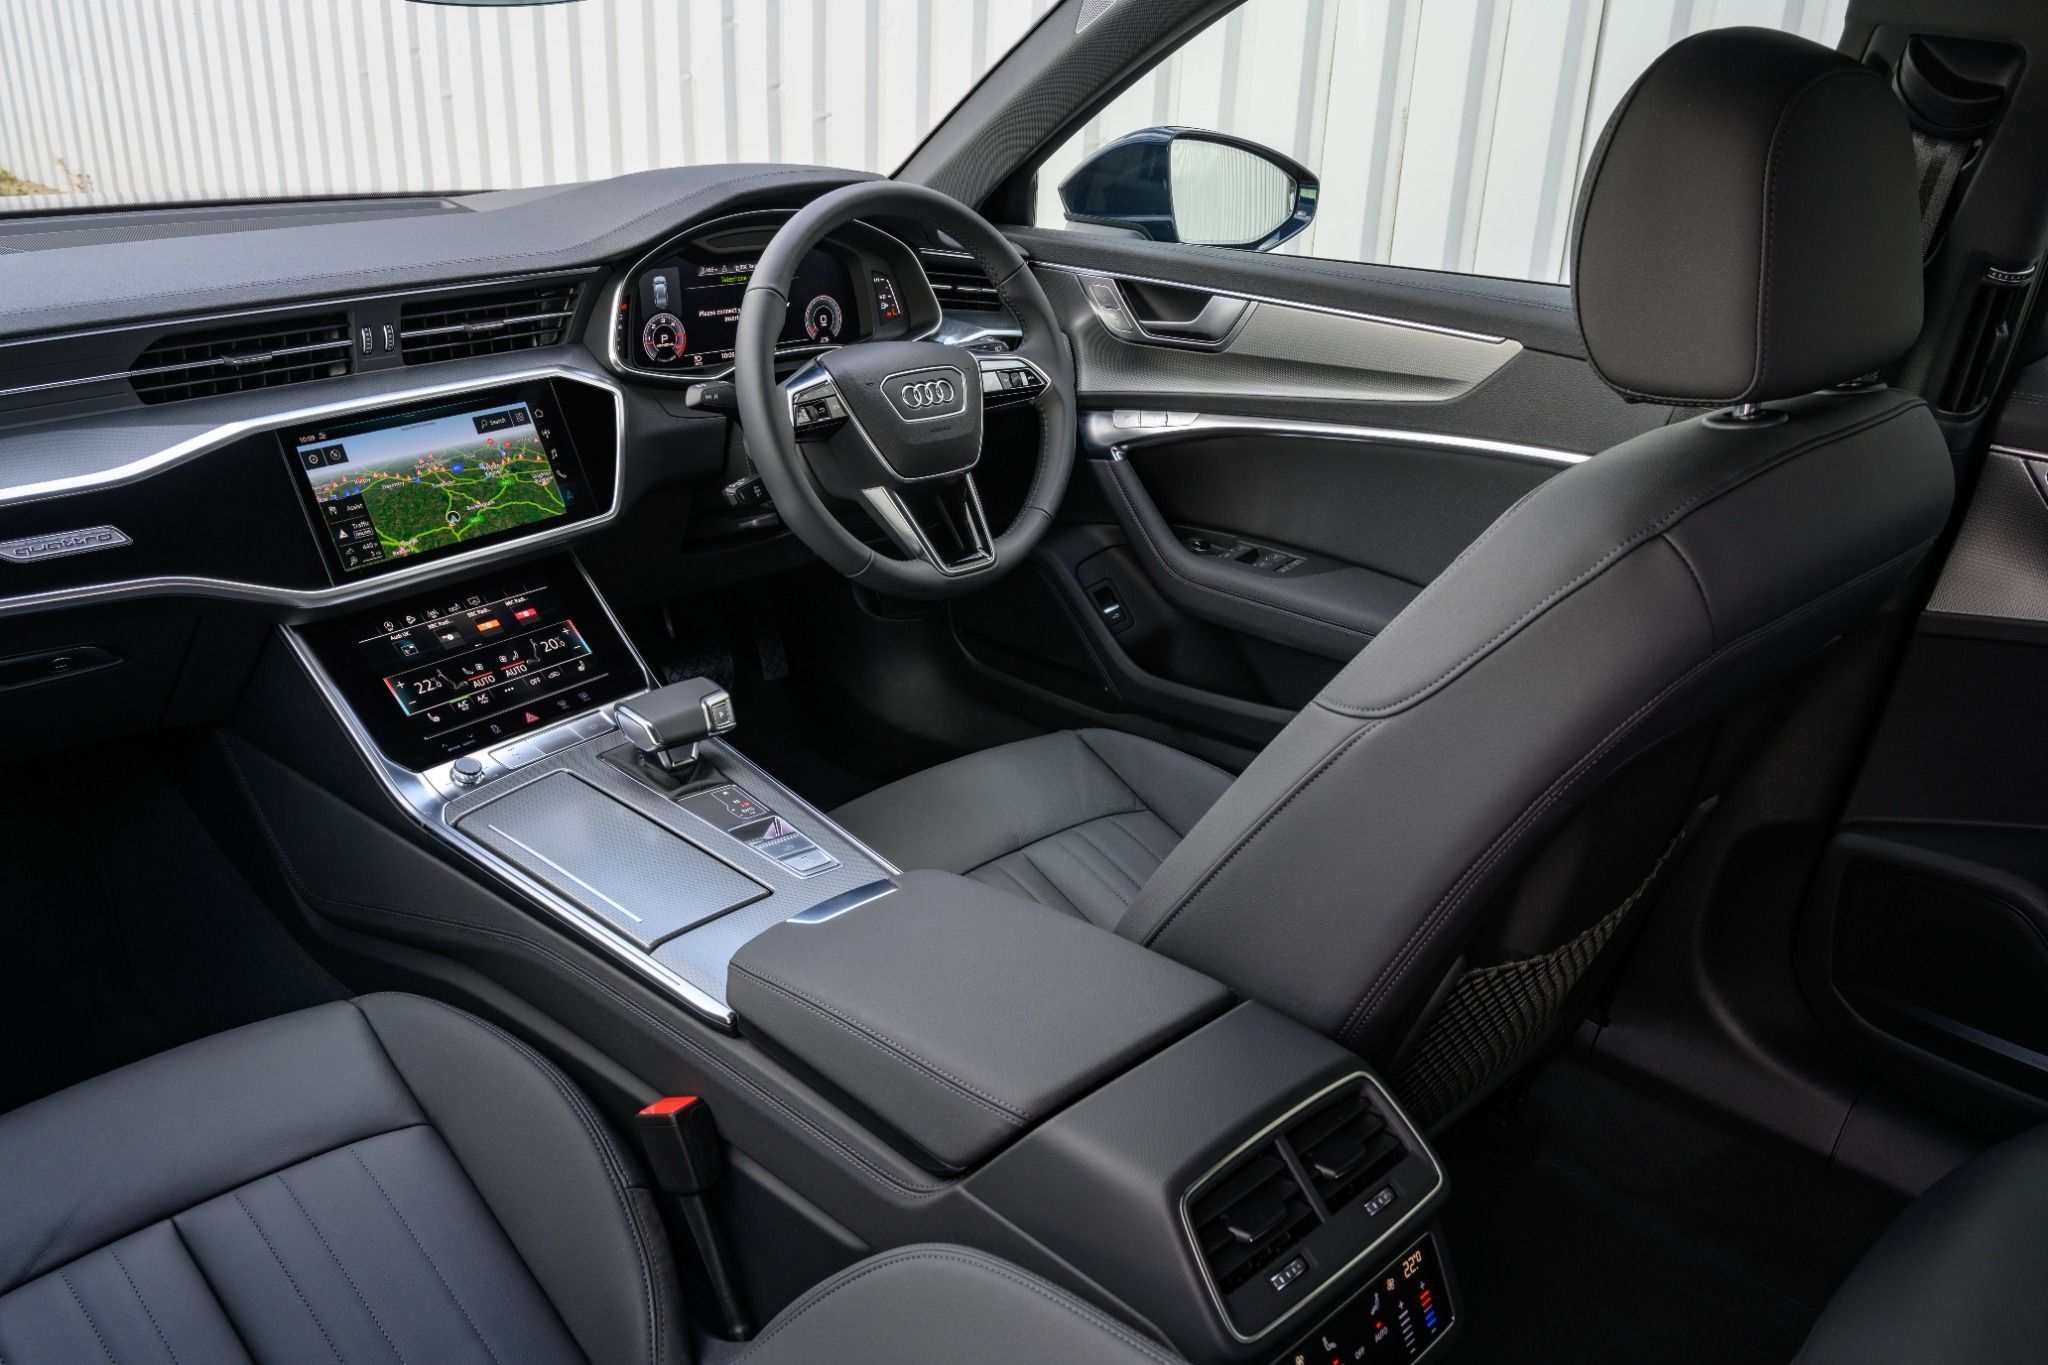 Interior of an Audi A6 Allroad